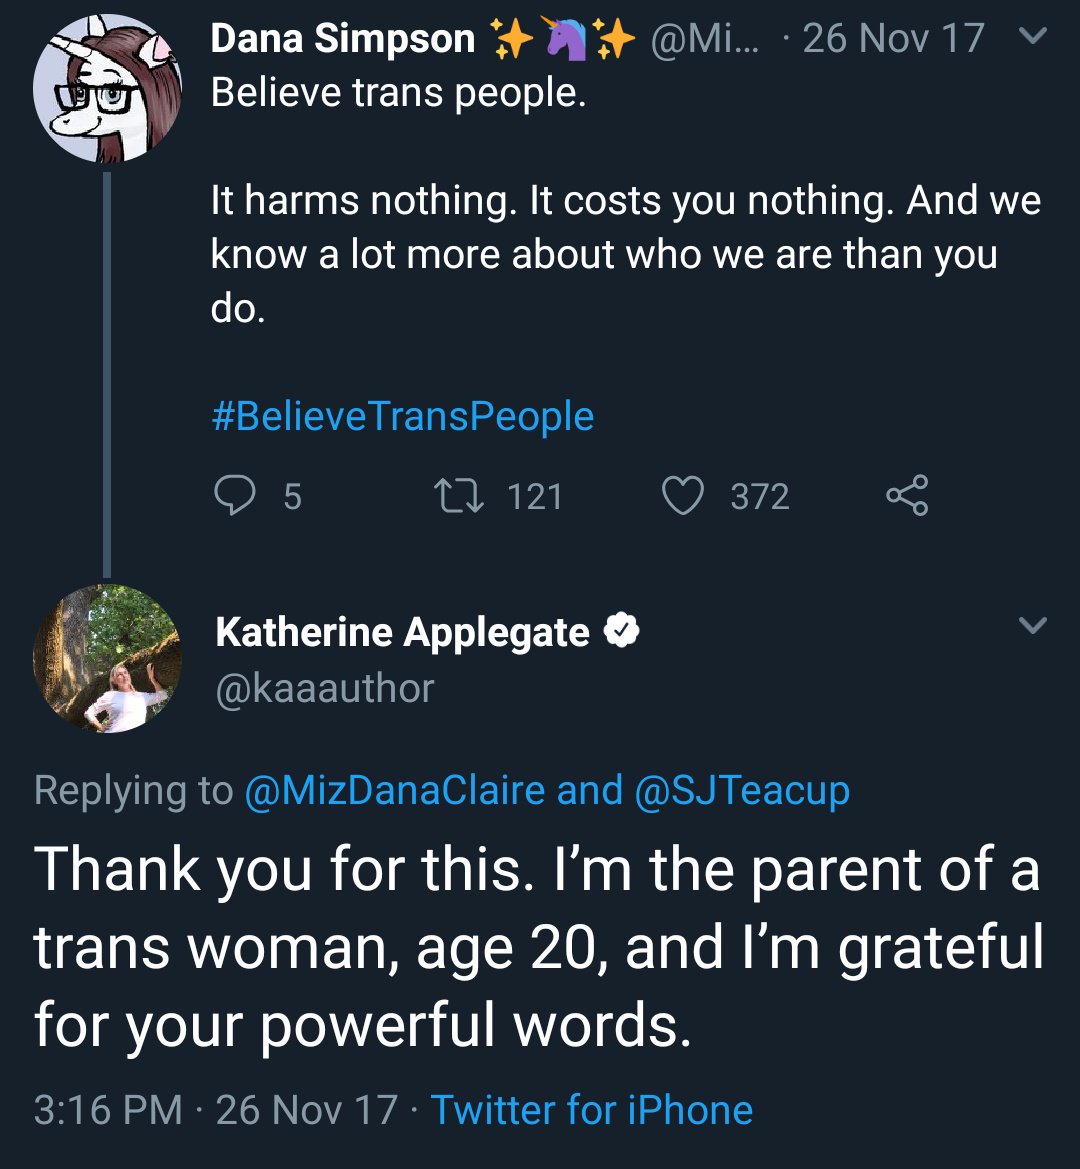 A reminder that while Rowling is a Terf, KA Applegate isn't and Animorphs is better than Harry Potter